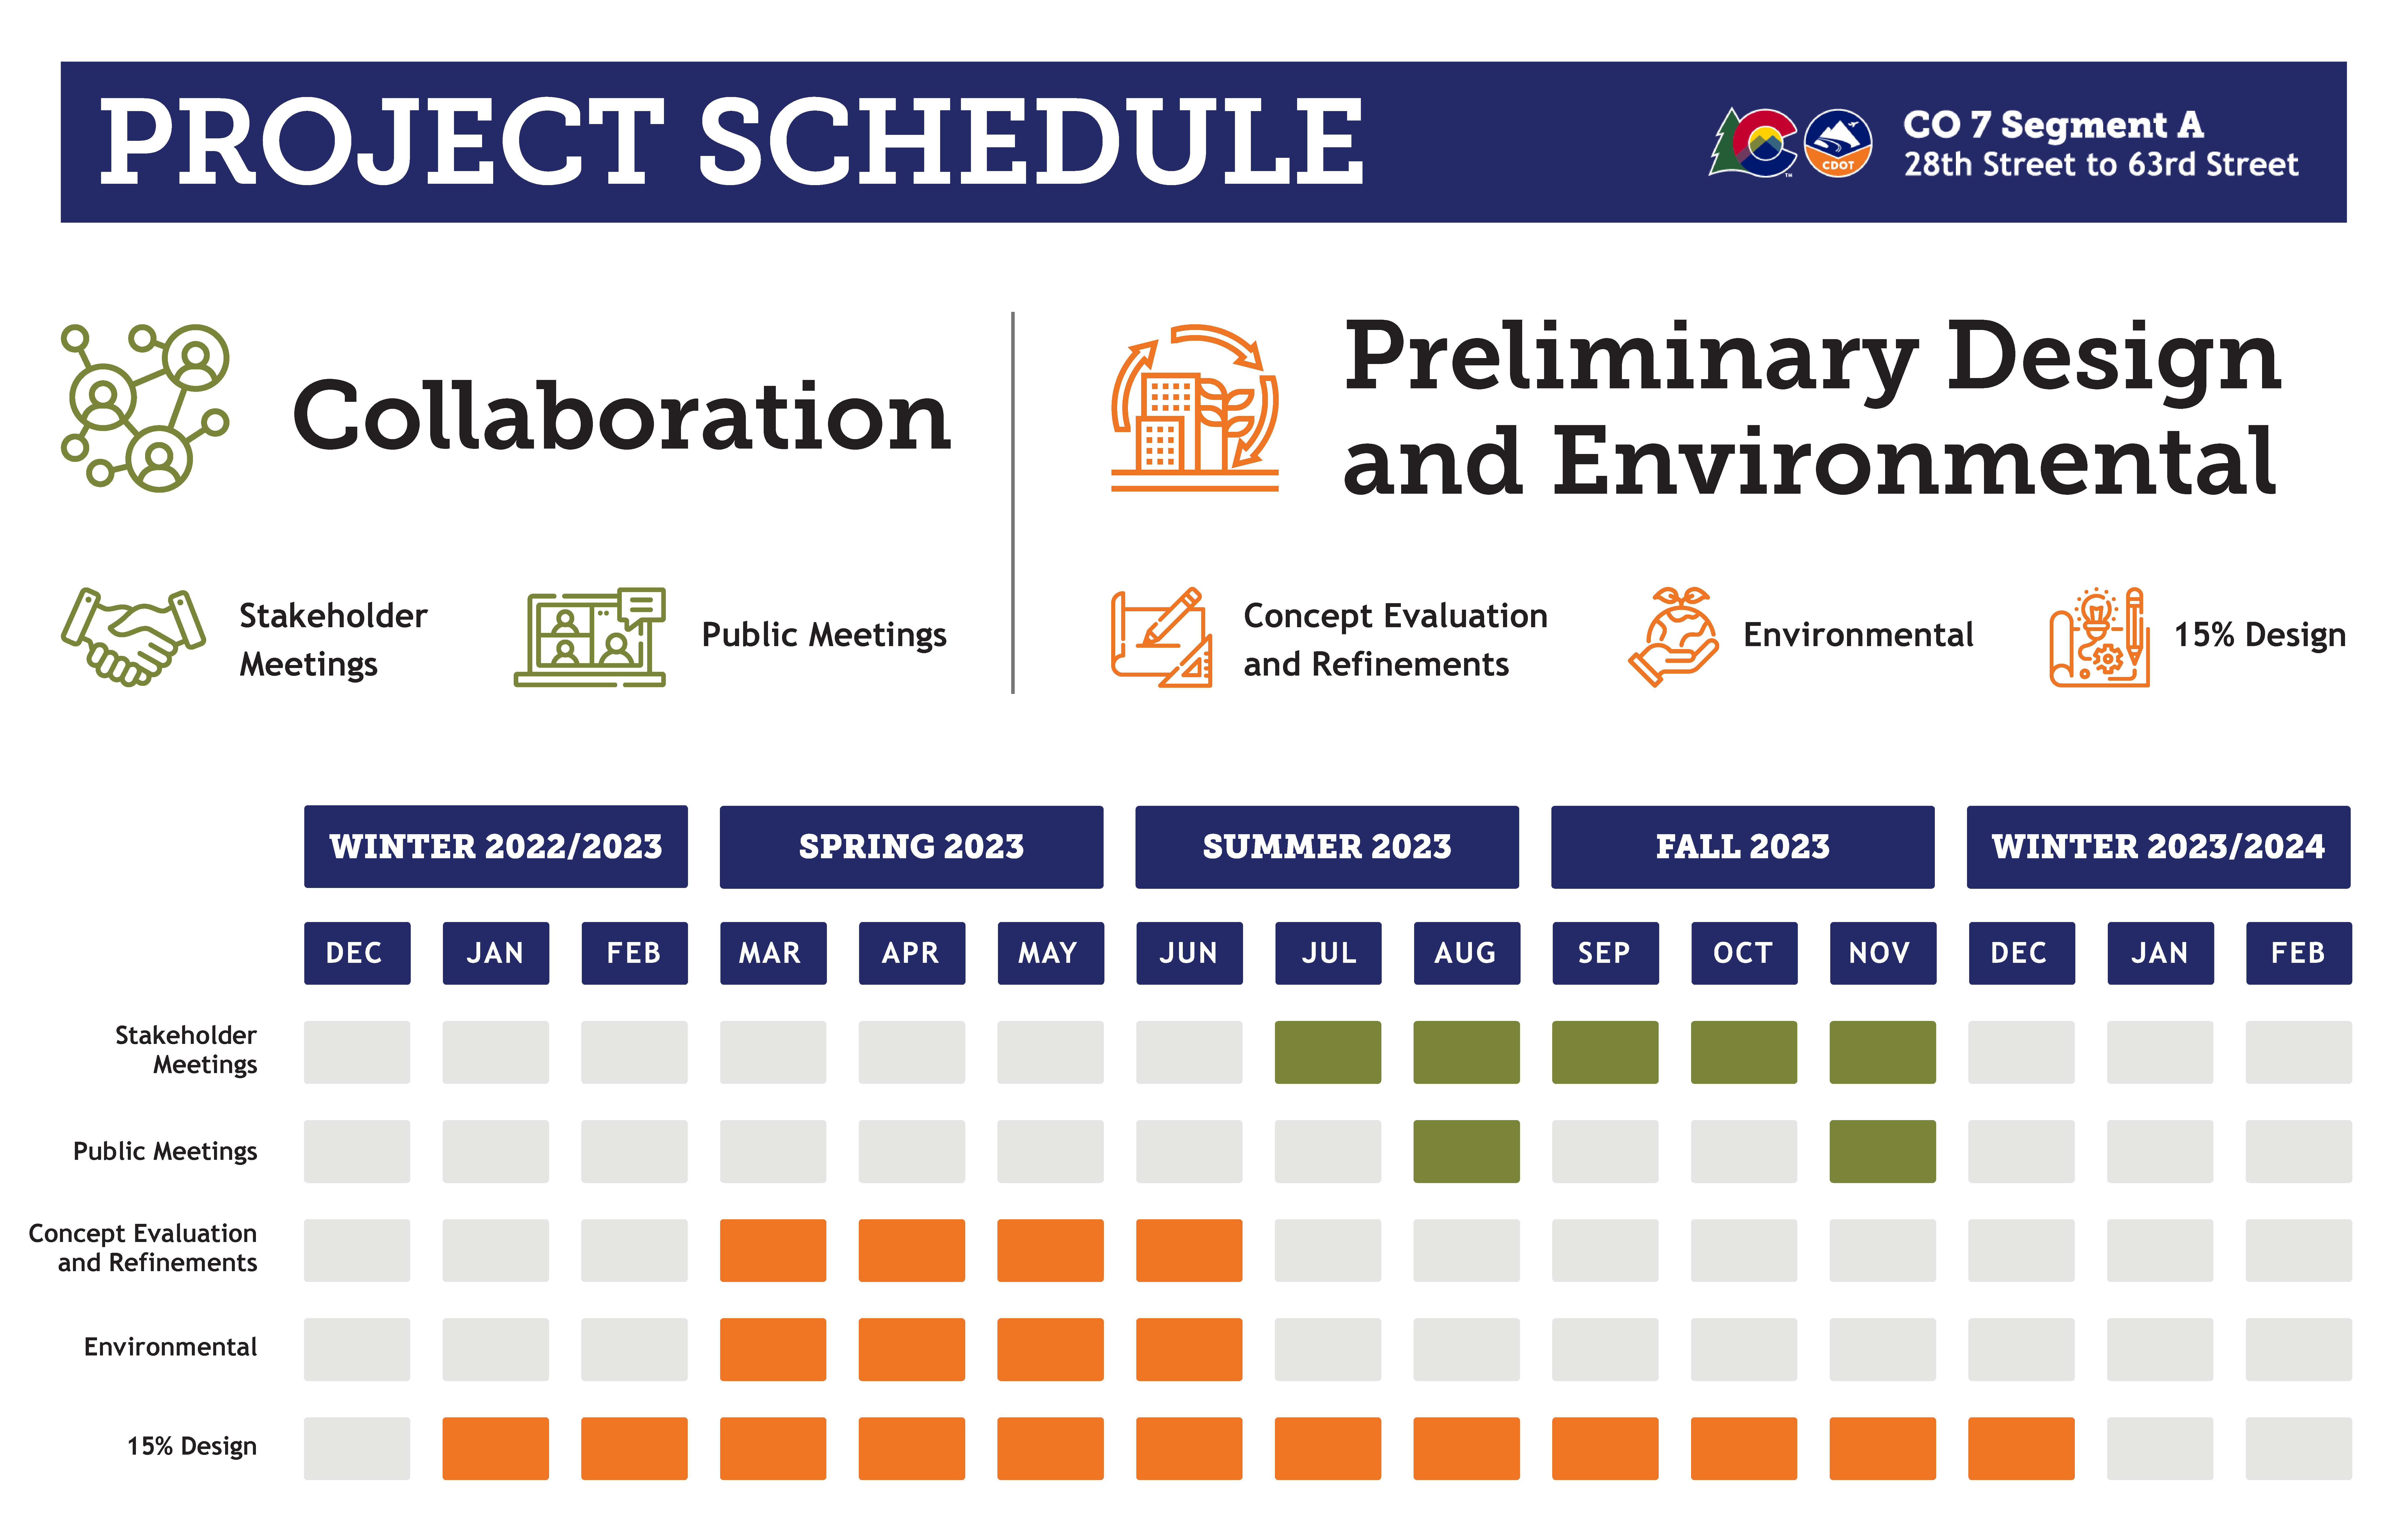 2023_0626_CDOT_CO7SIUA_ProjectTimeline_ENG_Text&Schedule_07.png detail image